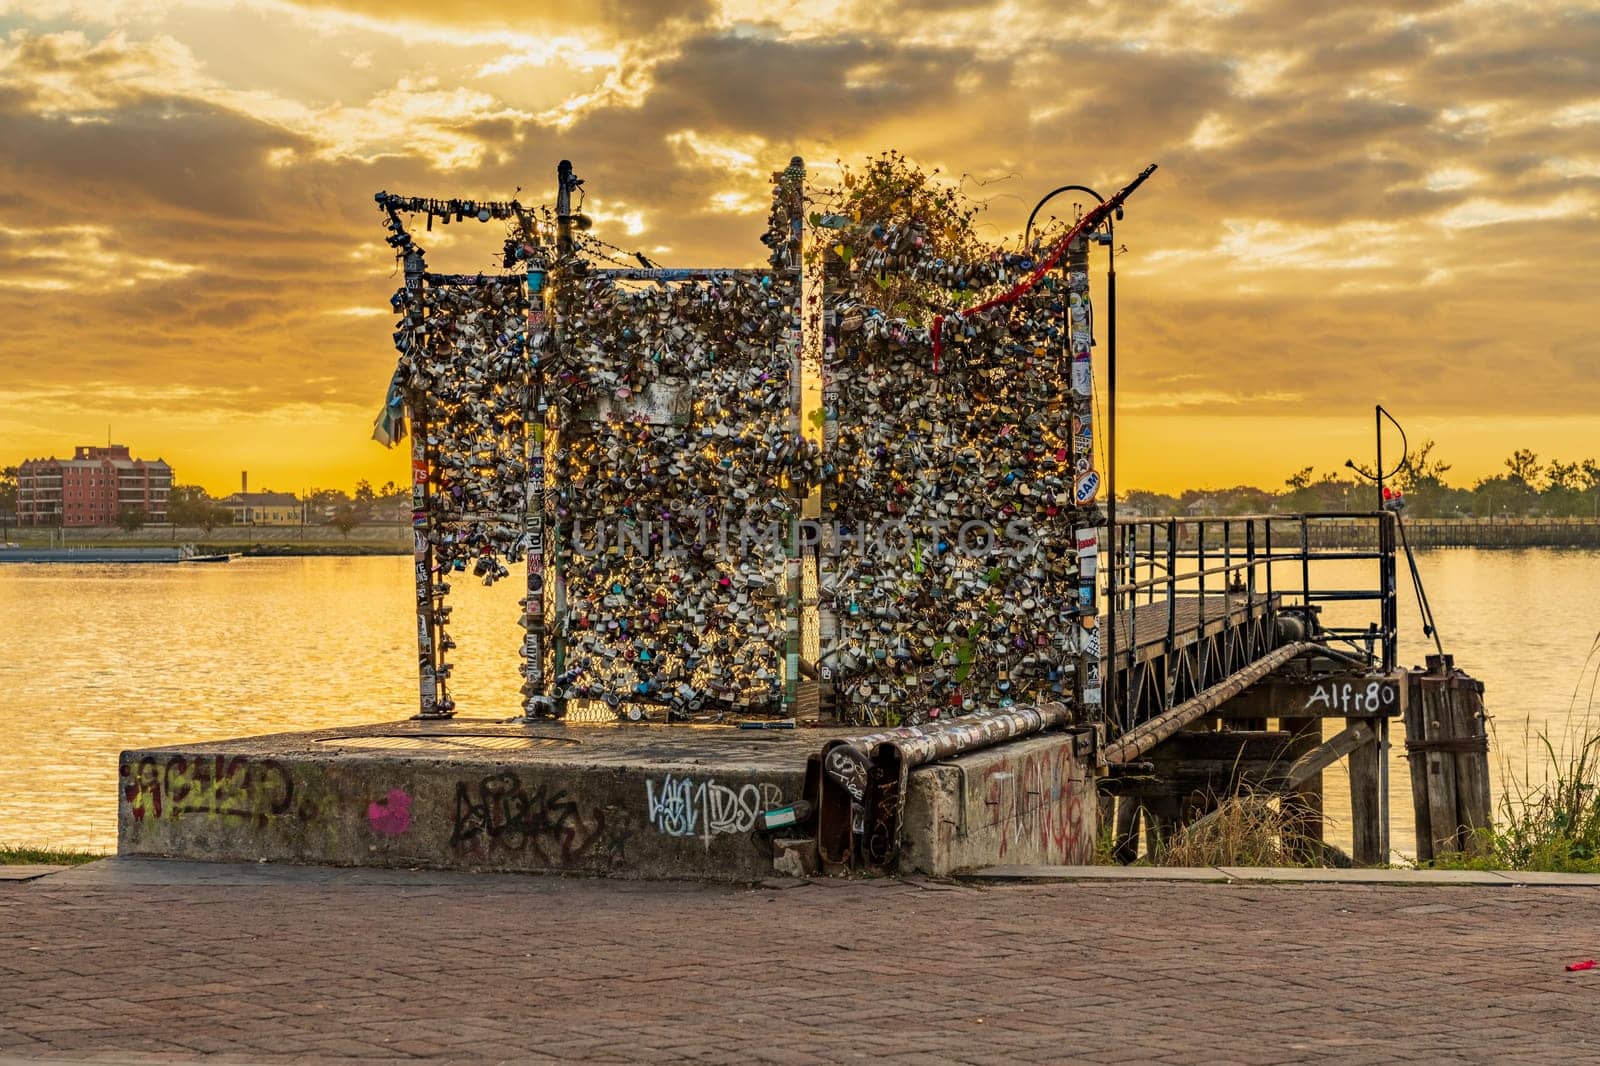 Fence covered with lovers padlocks in New Orleans at sunrise by steheap